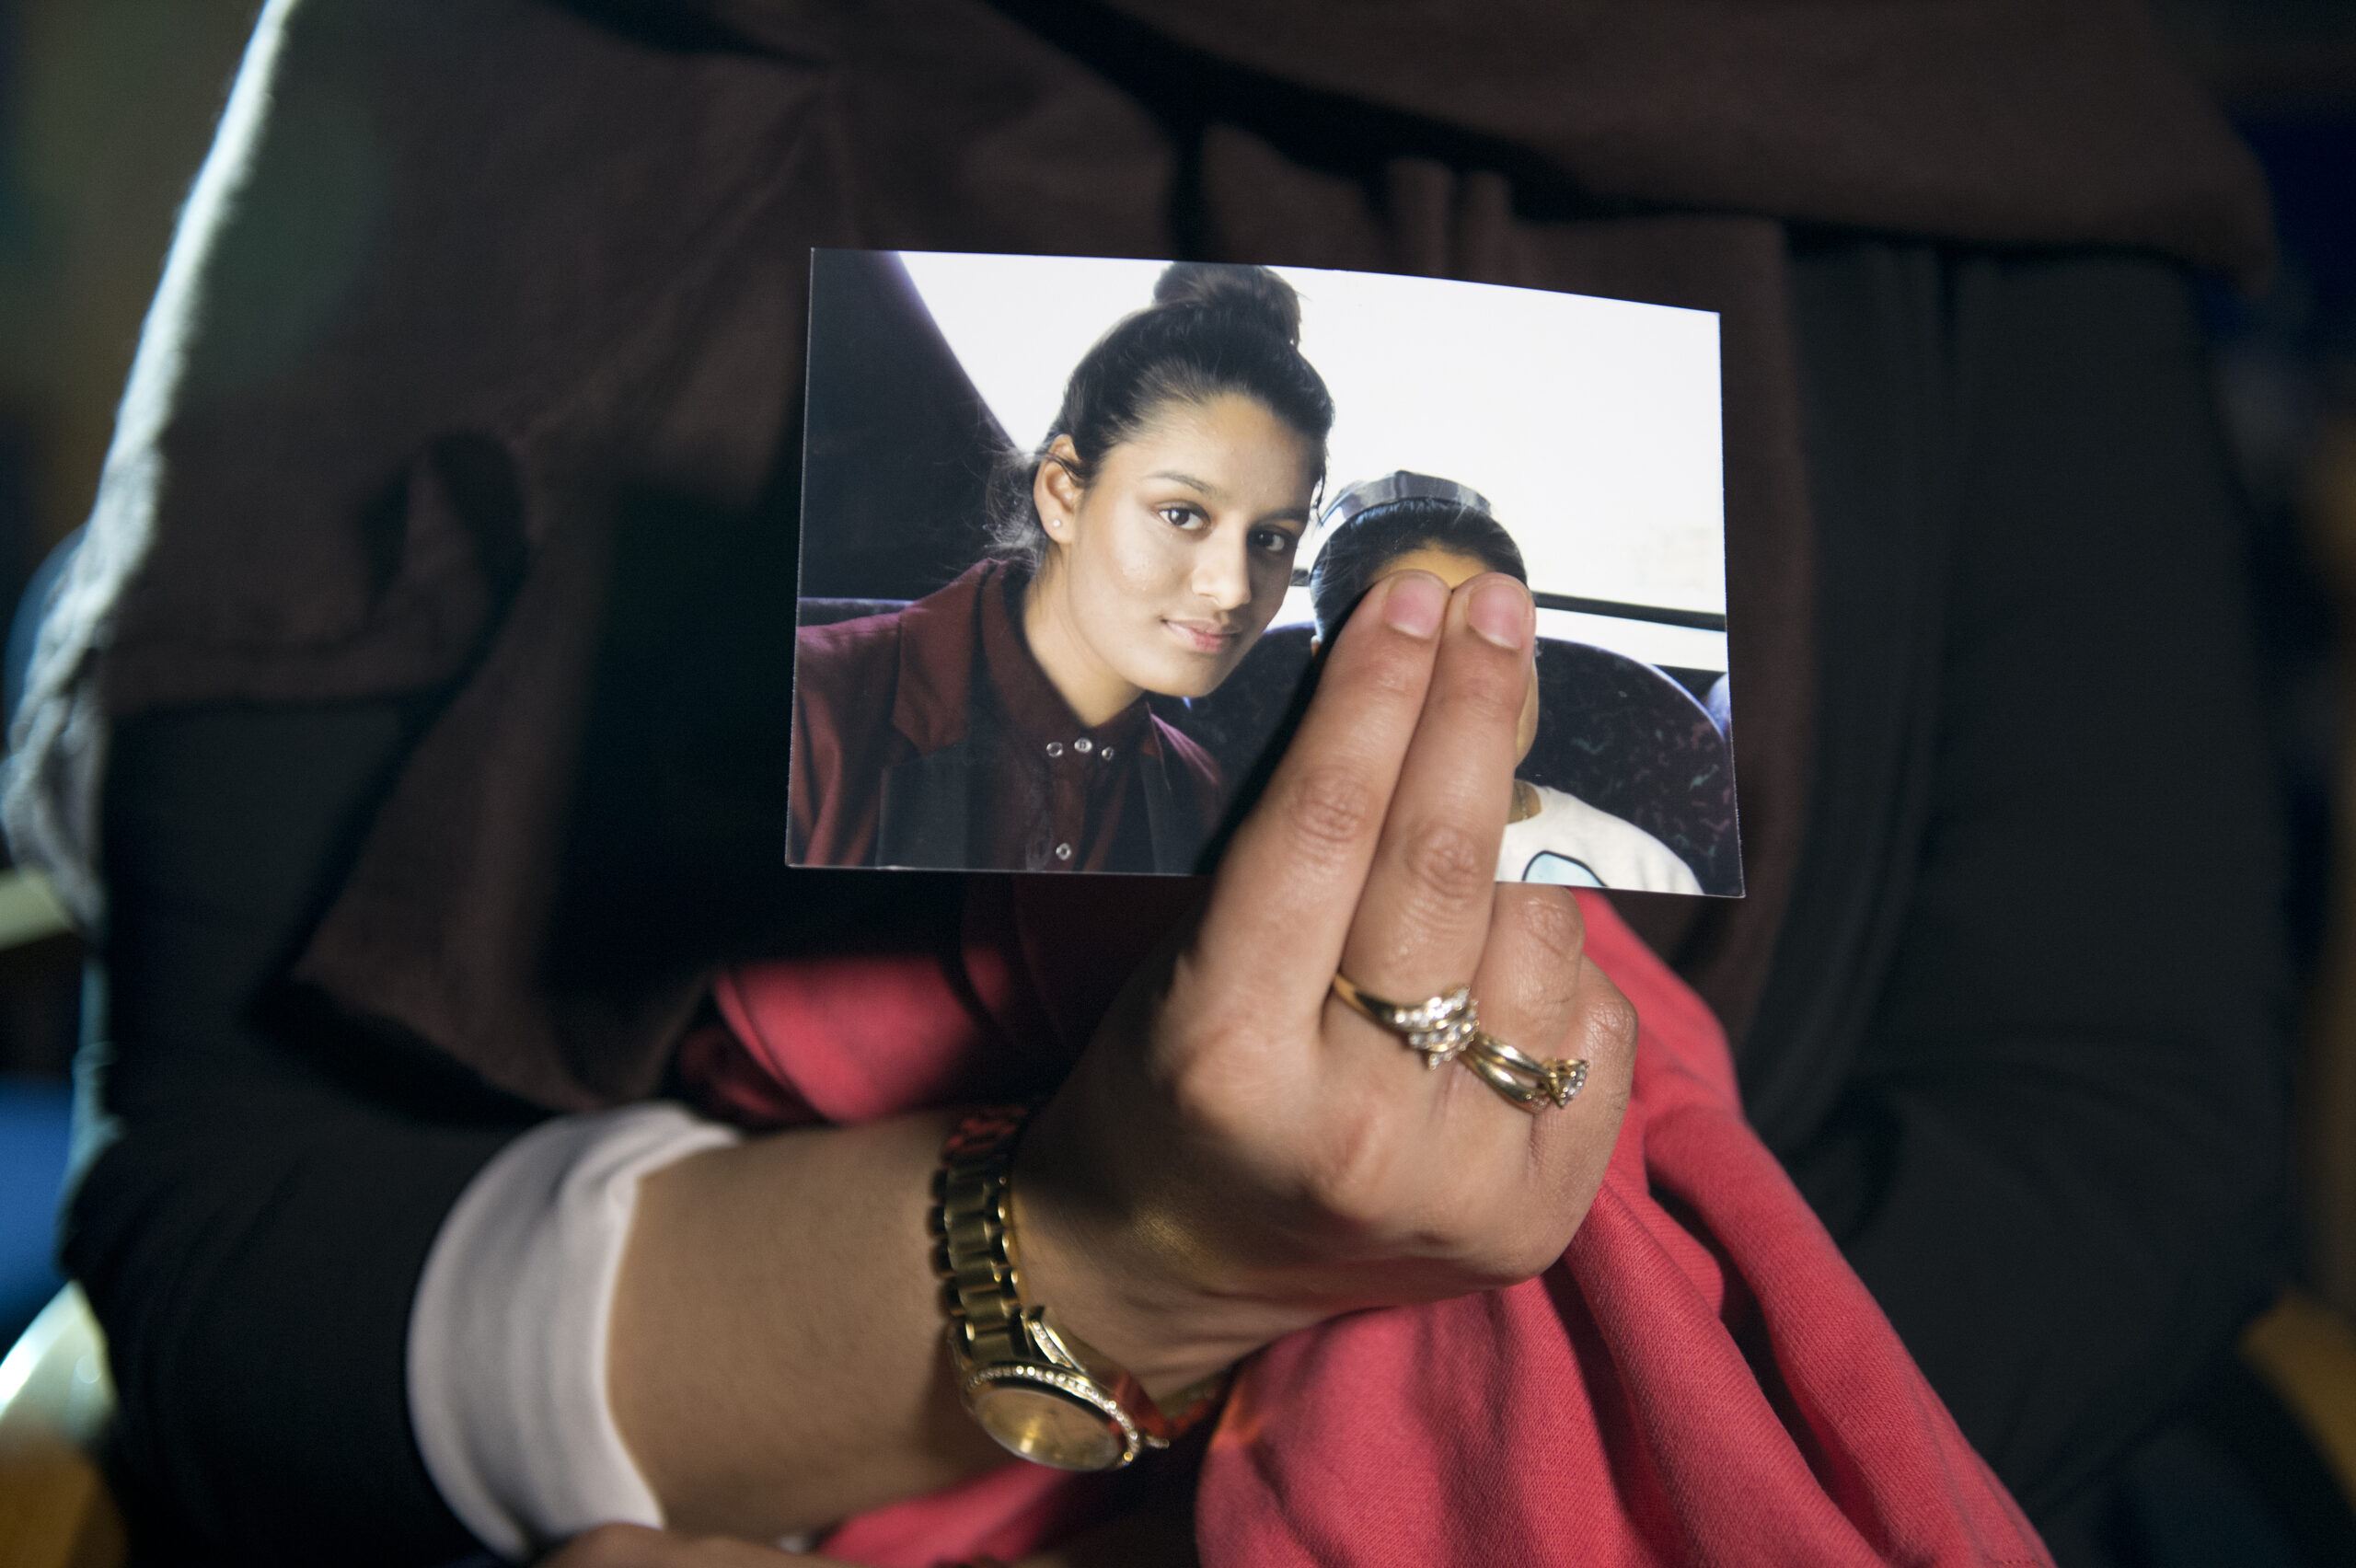 The older sister of Shamima Begum, Renu Begum, holds a photo of her sister with a child. Two of her fingers obscure the child's face. She is wearing rings on two of her fingers and a watch on her wrist. In the photo, Shamima's hair is tied in a bun and she's wearing a burgundy button down shirt buttoned to the top, and a matching blazer over it. She is looking directly at the camera.